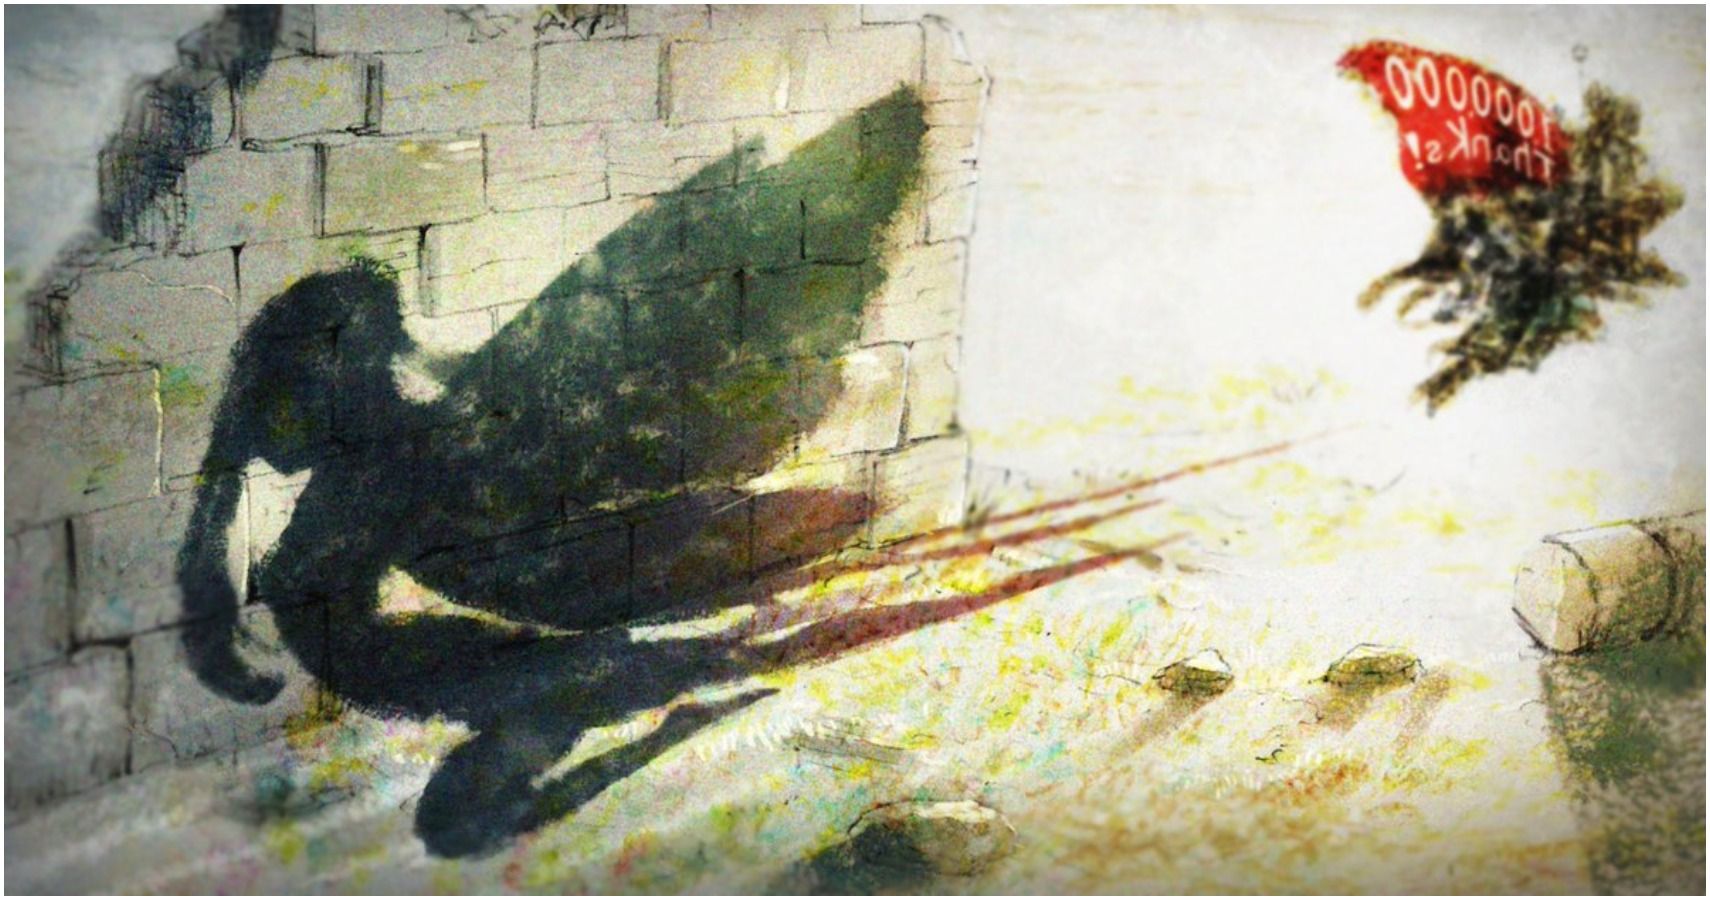 Square Enix Is Teasing The Return Of Bravely Default On Twitter (Again)